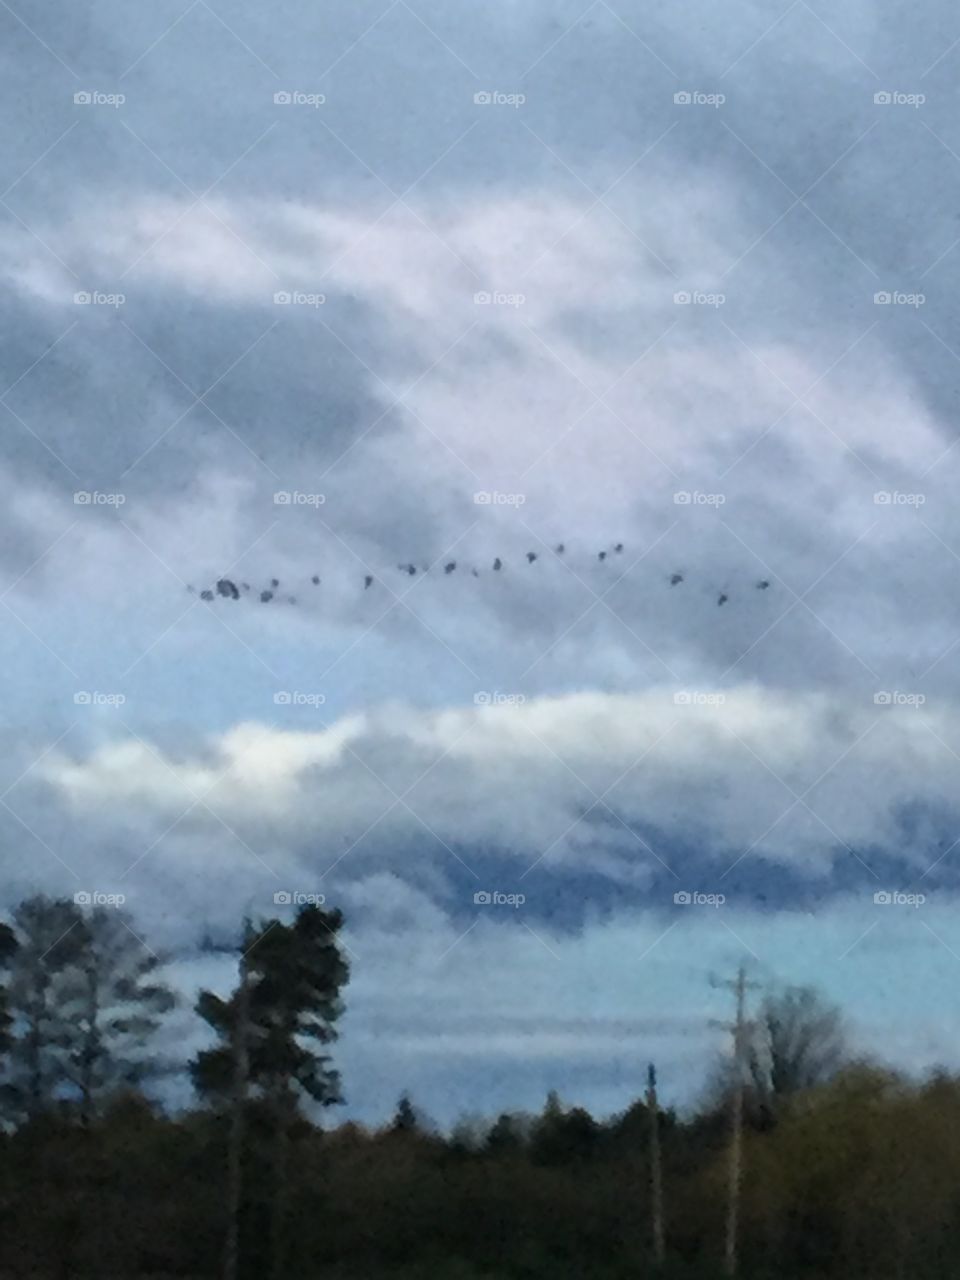 Flock of birds flying Is daylight brakes and the sky he’s trying to give away to daylight with it’s pink and dark and moody clouds